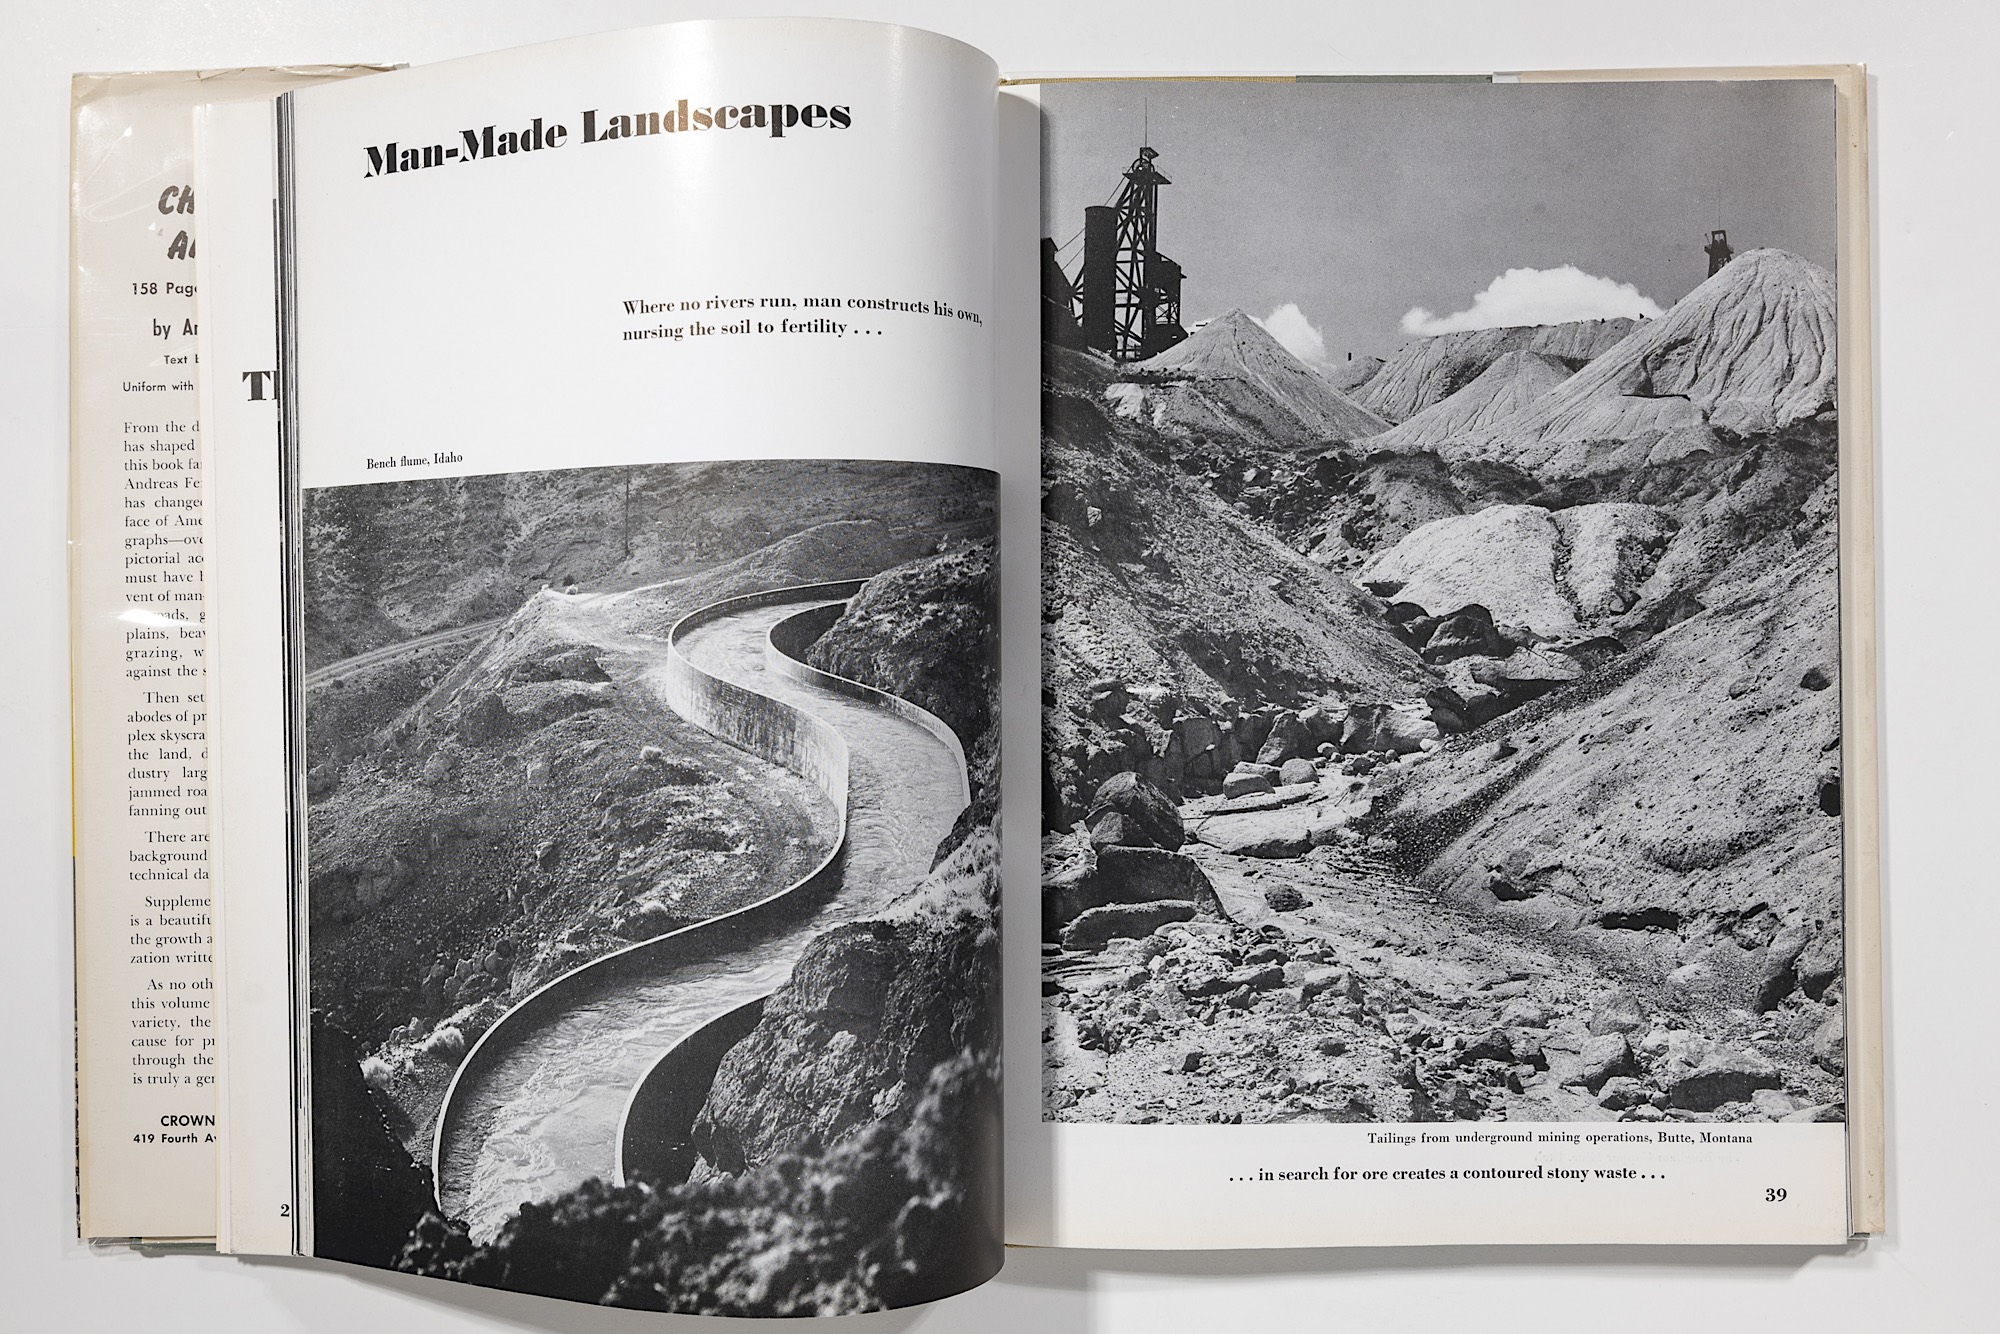 Andreas Feininger - Changing America: The Land As It Was and How Man Has Changed It Image 5